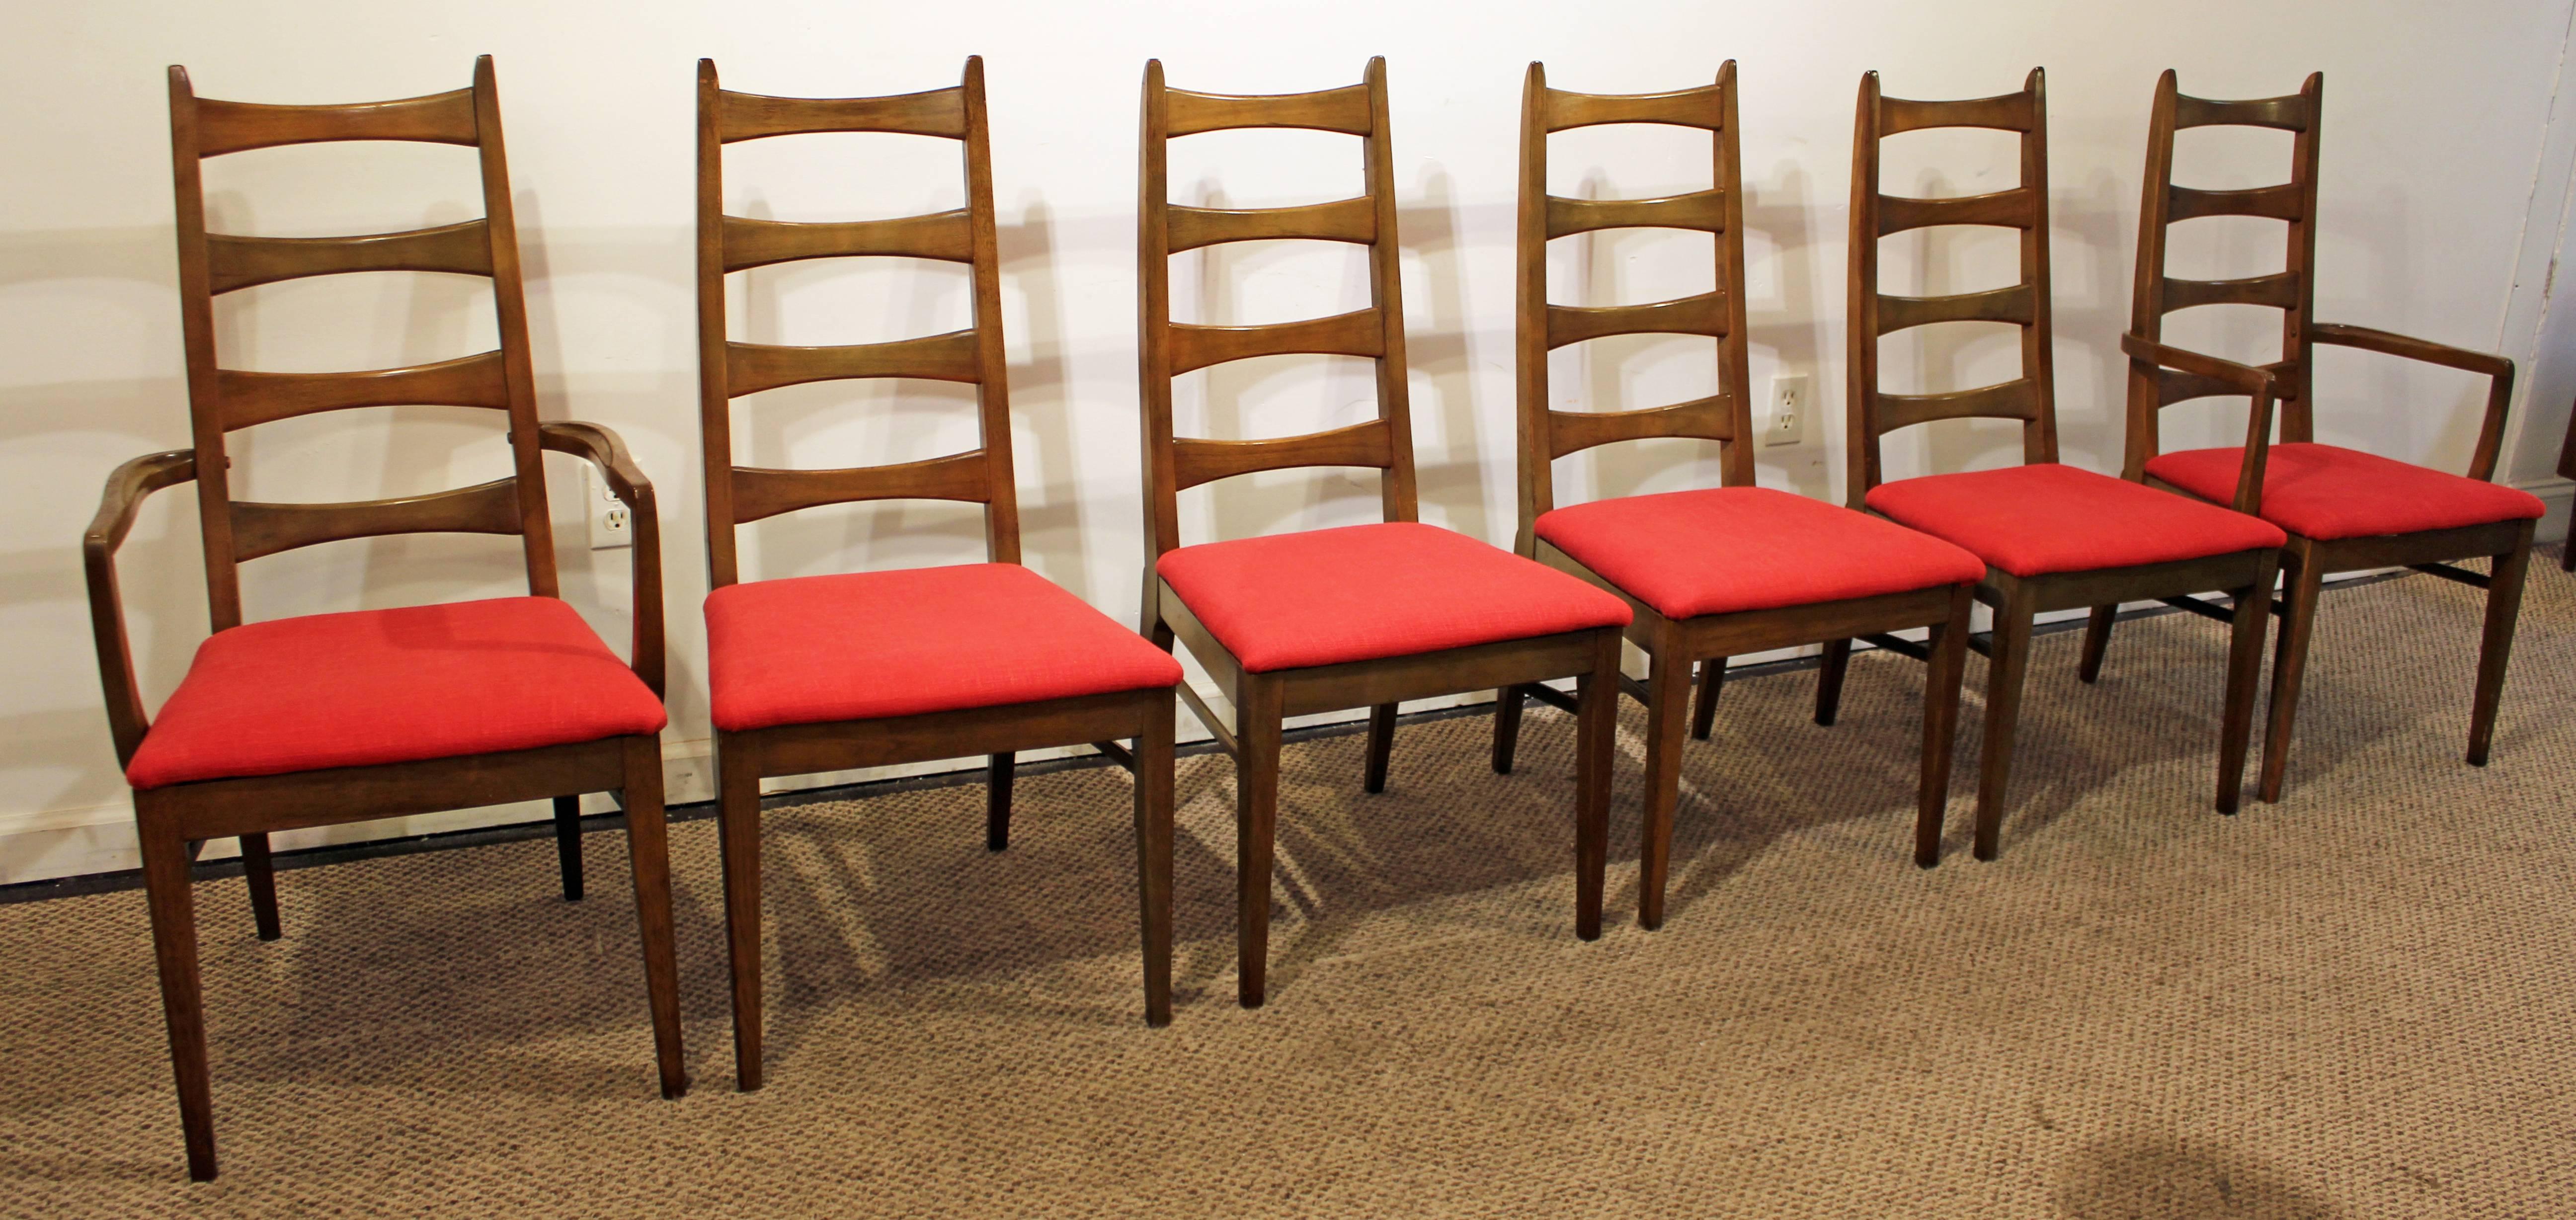 Offered is a set of six Mid-Century Modern dining chairs with bow tie backs. They are walnut and have been reupholstered with new red fabric. 

Approximate dimensions:
side chairs: 19.5